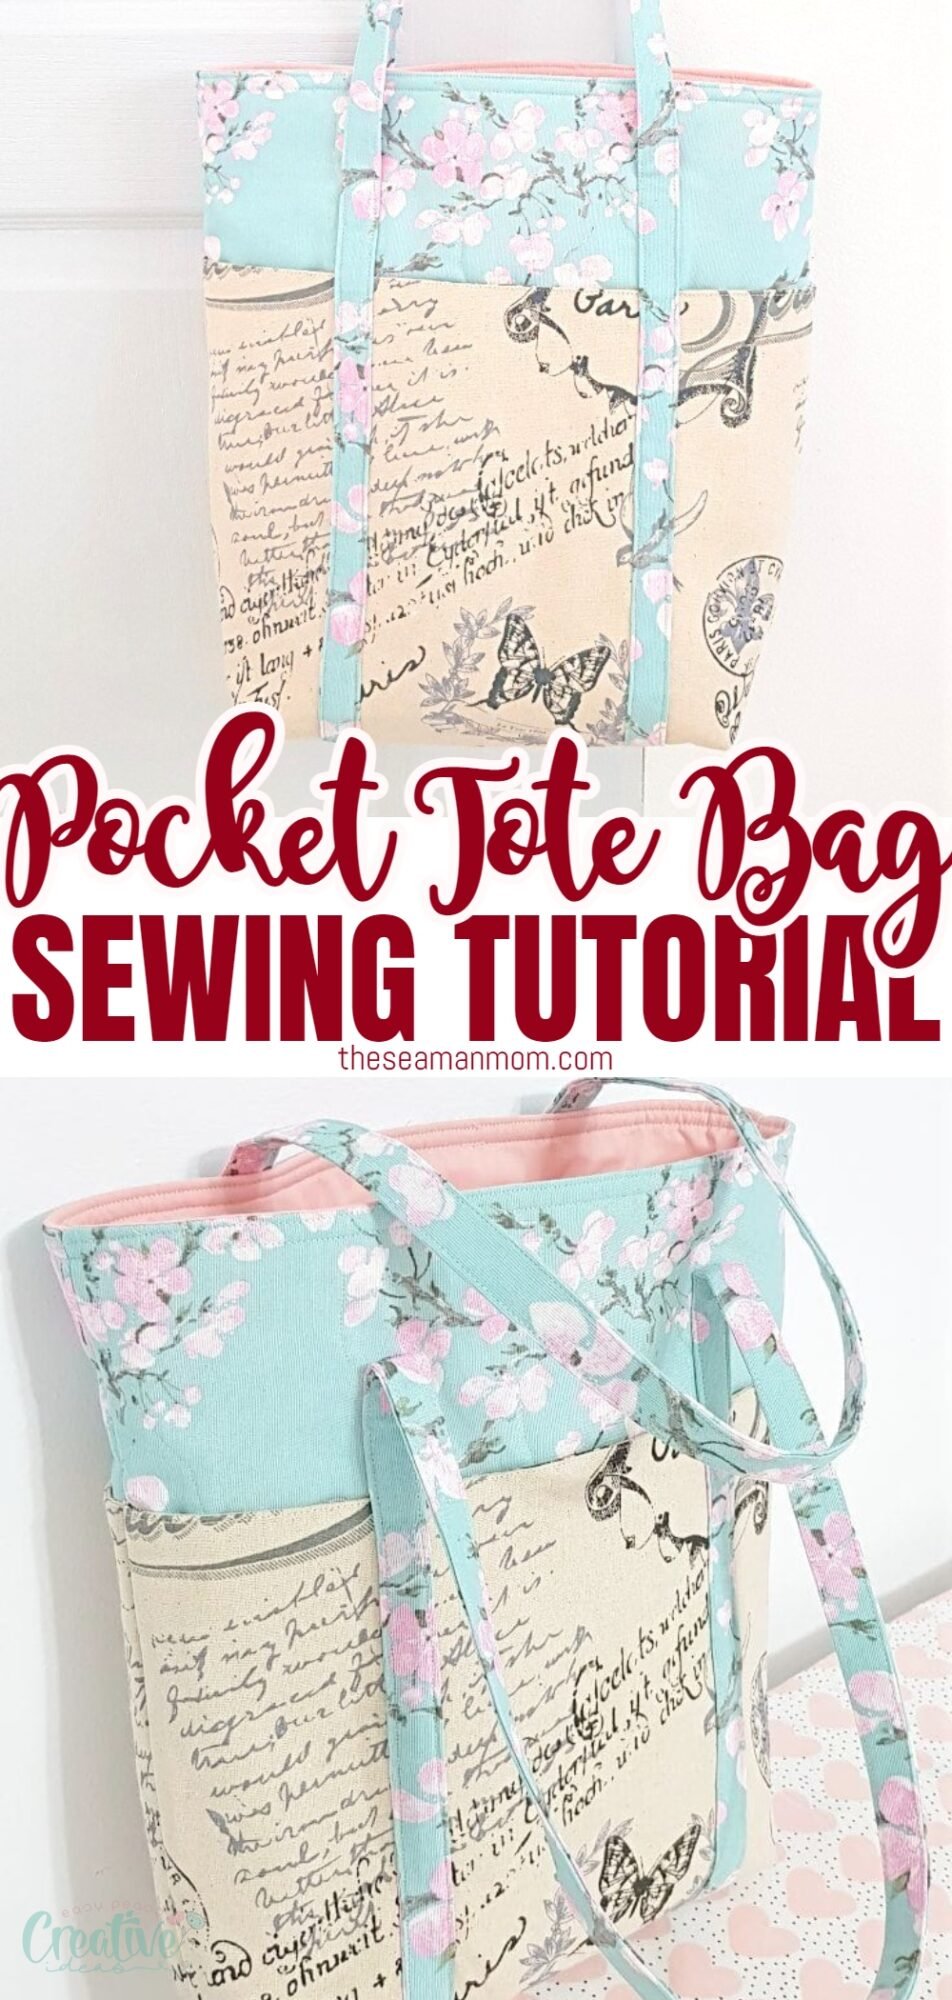 A step-by-step sewing tutorial for a multi pocket tote bag. Perfect for bag enthusiasts who want a versatile and practical accessory.